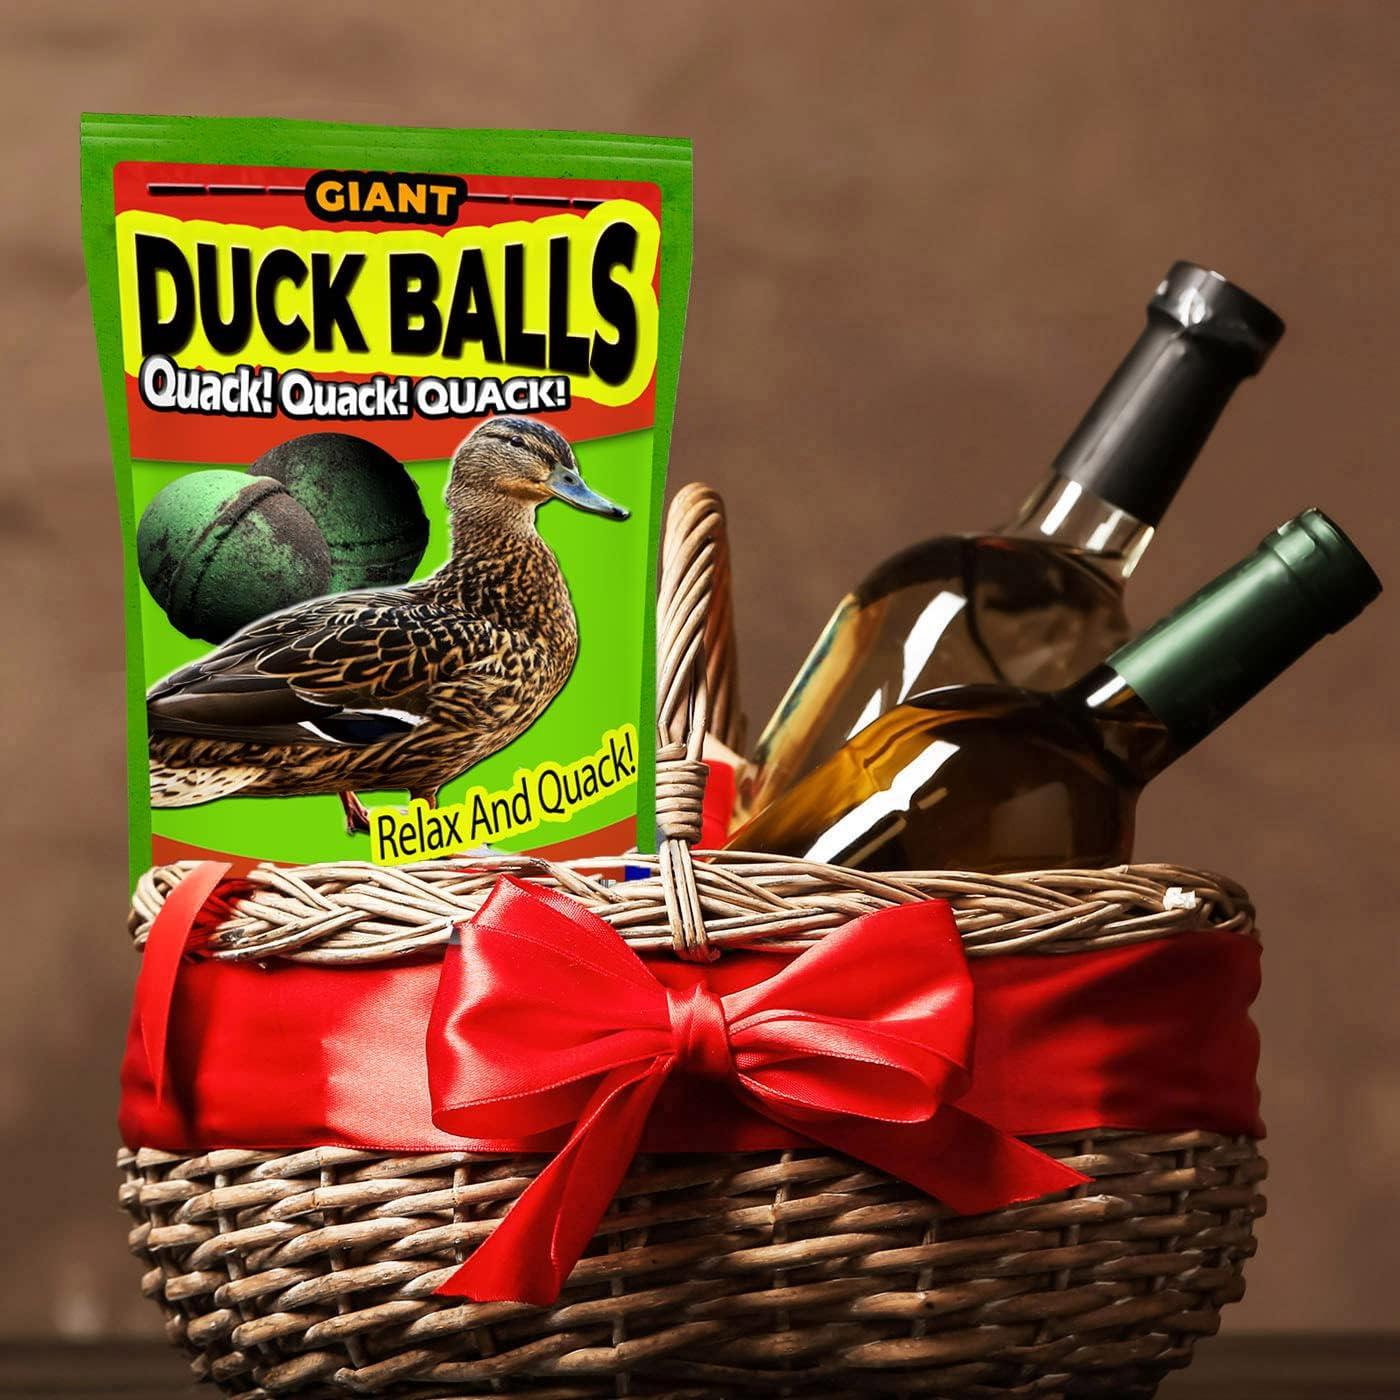 Giant Duck Balls Bath Time Adventure Kit - Funny Gift for Hunters